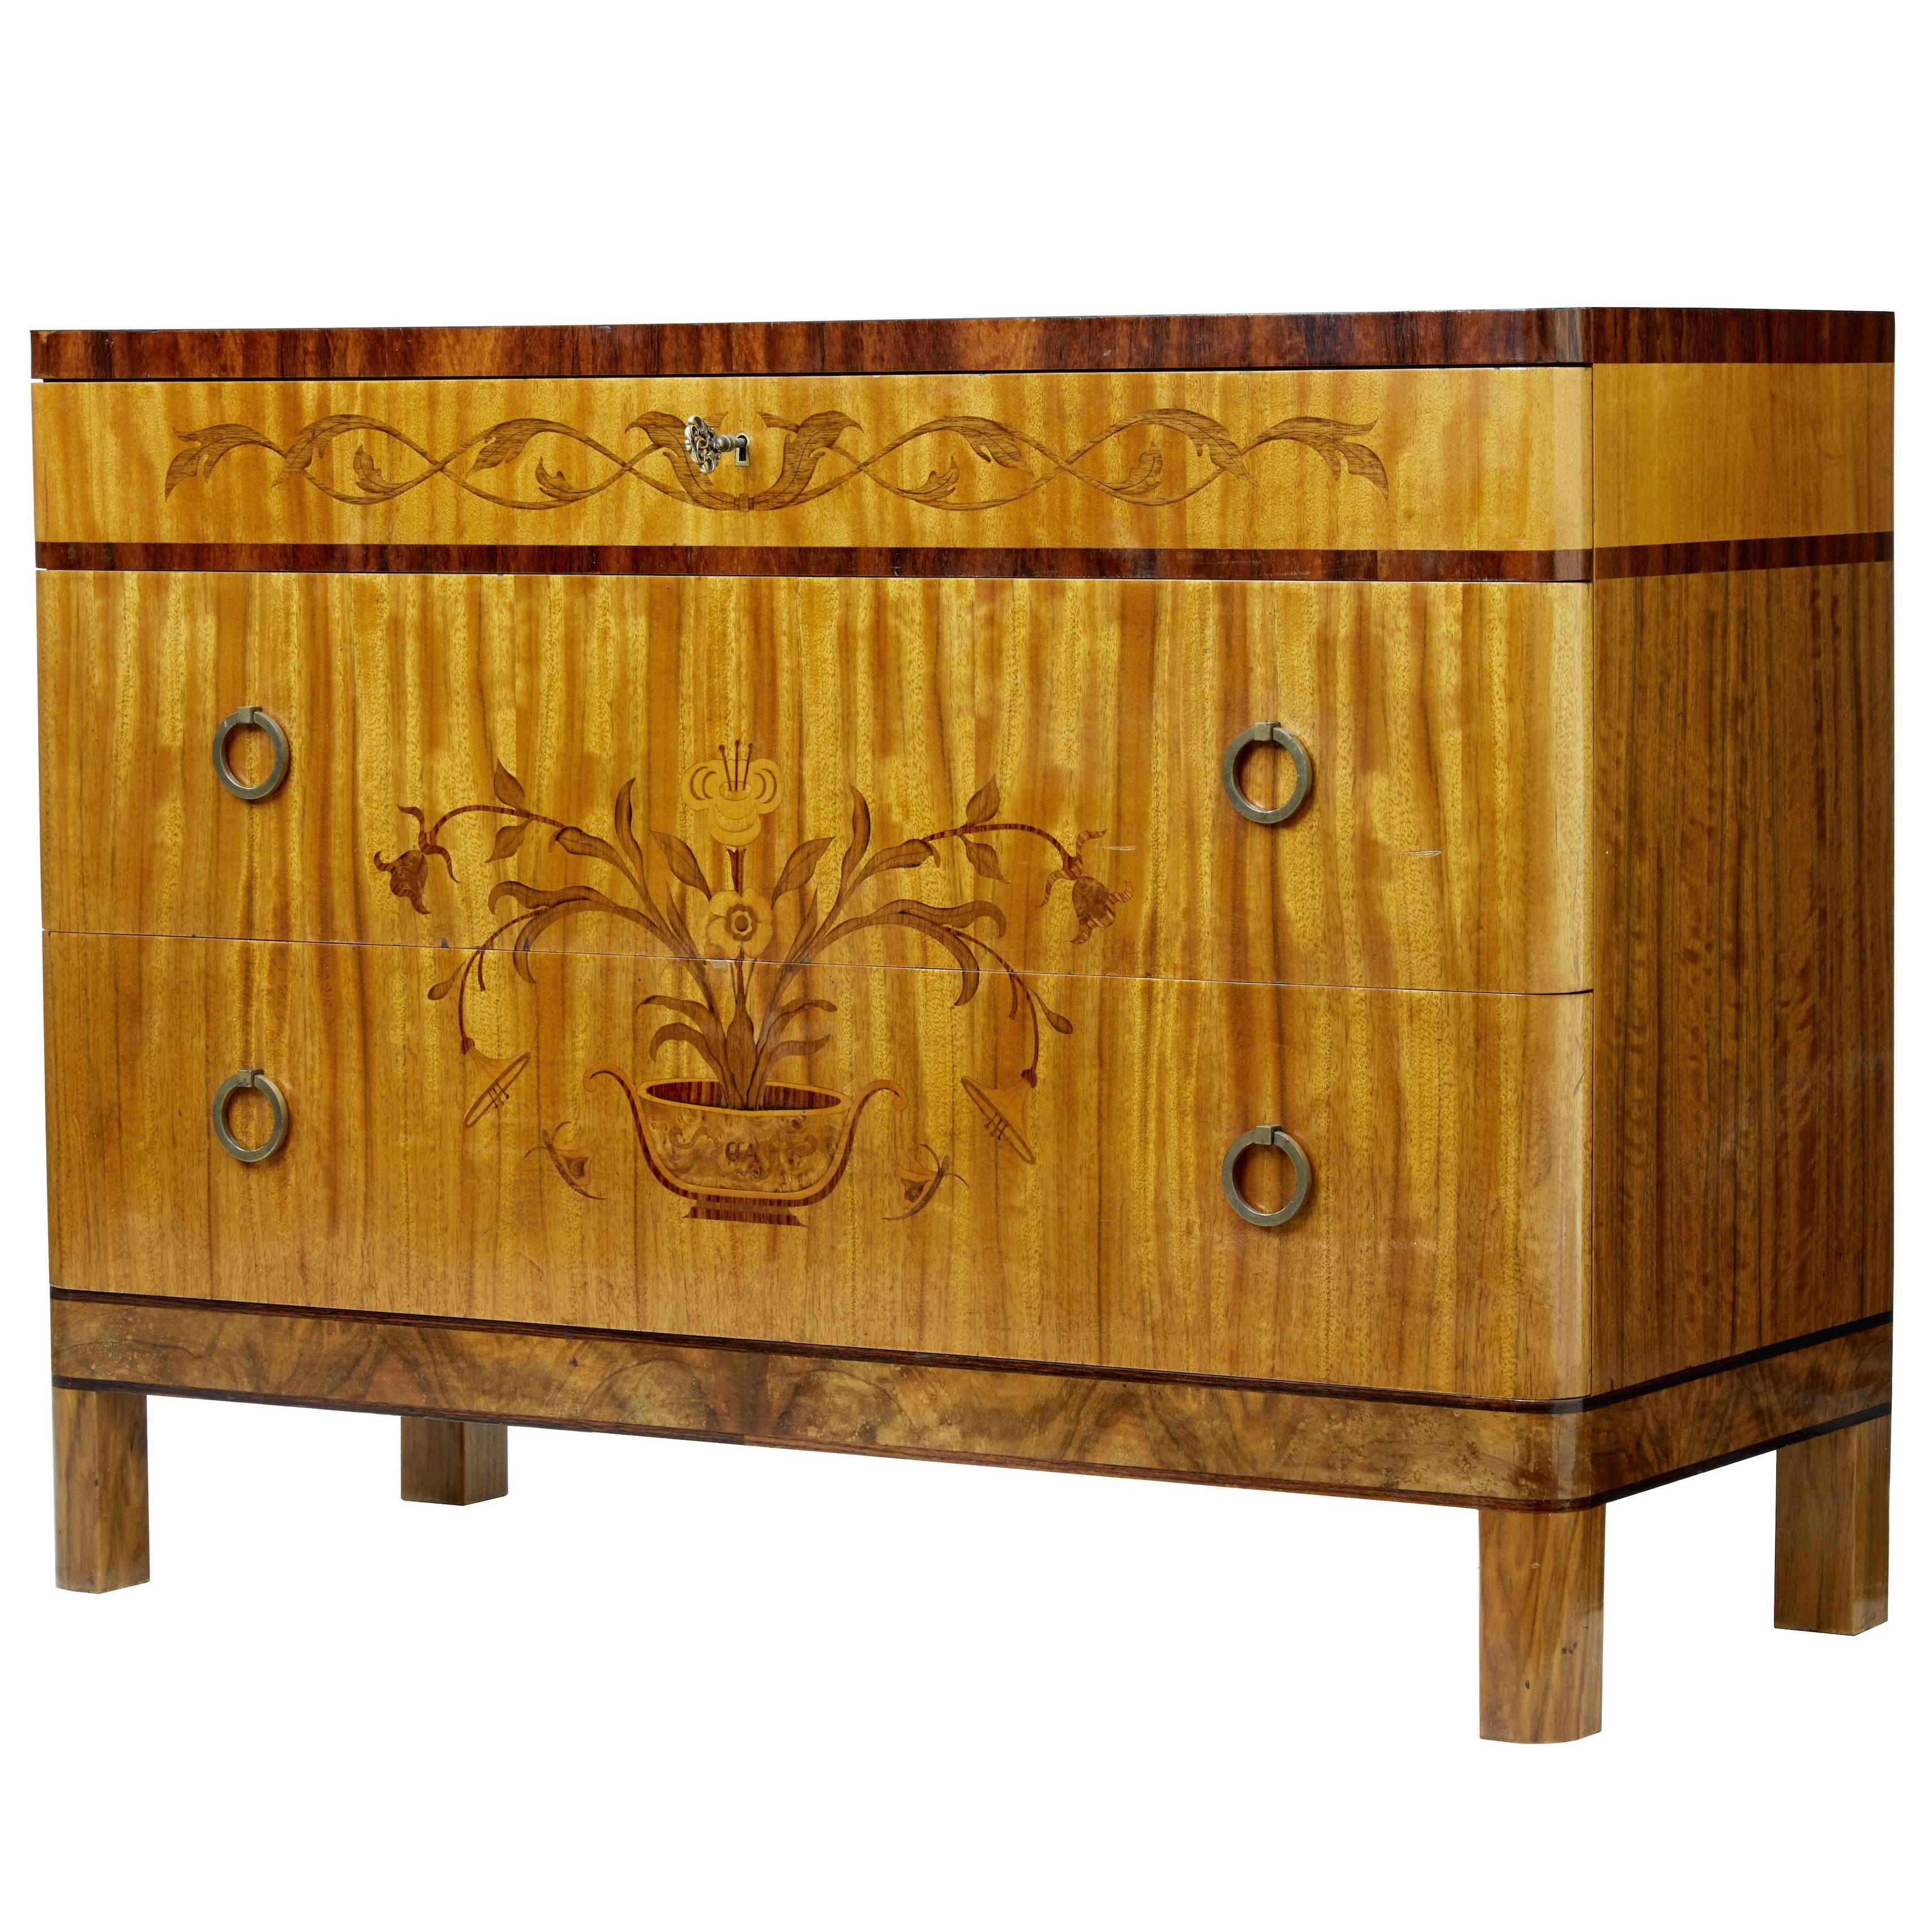 1930s Art Deco Birch and Walnut Inlaid Chest of Drawers